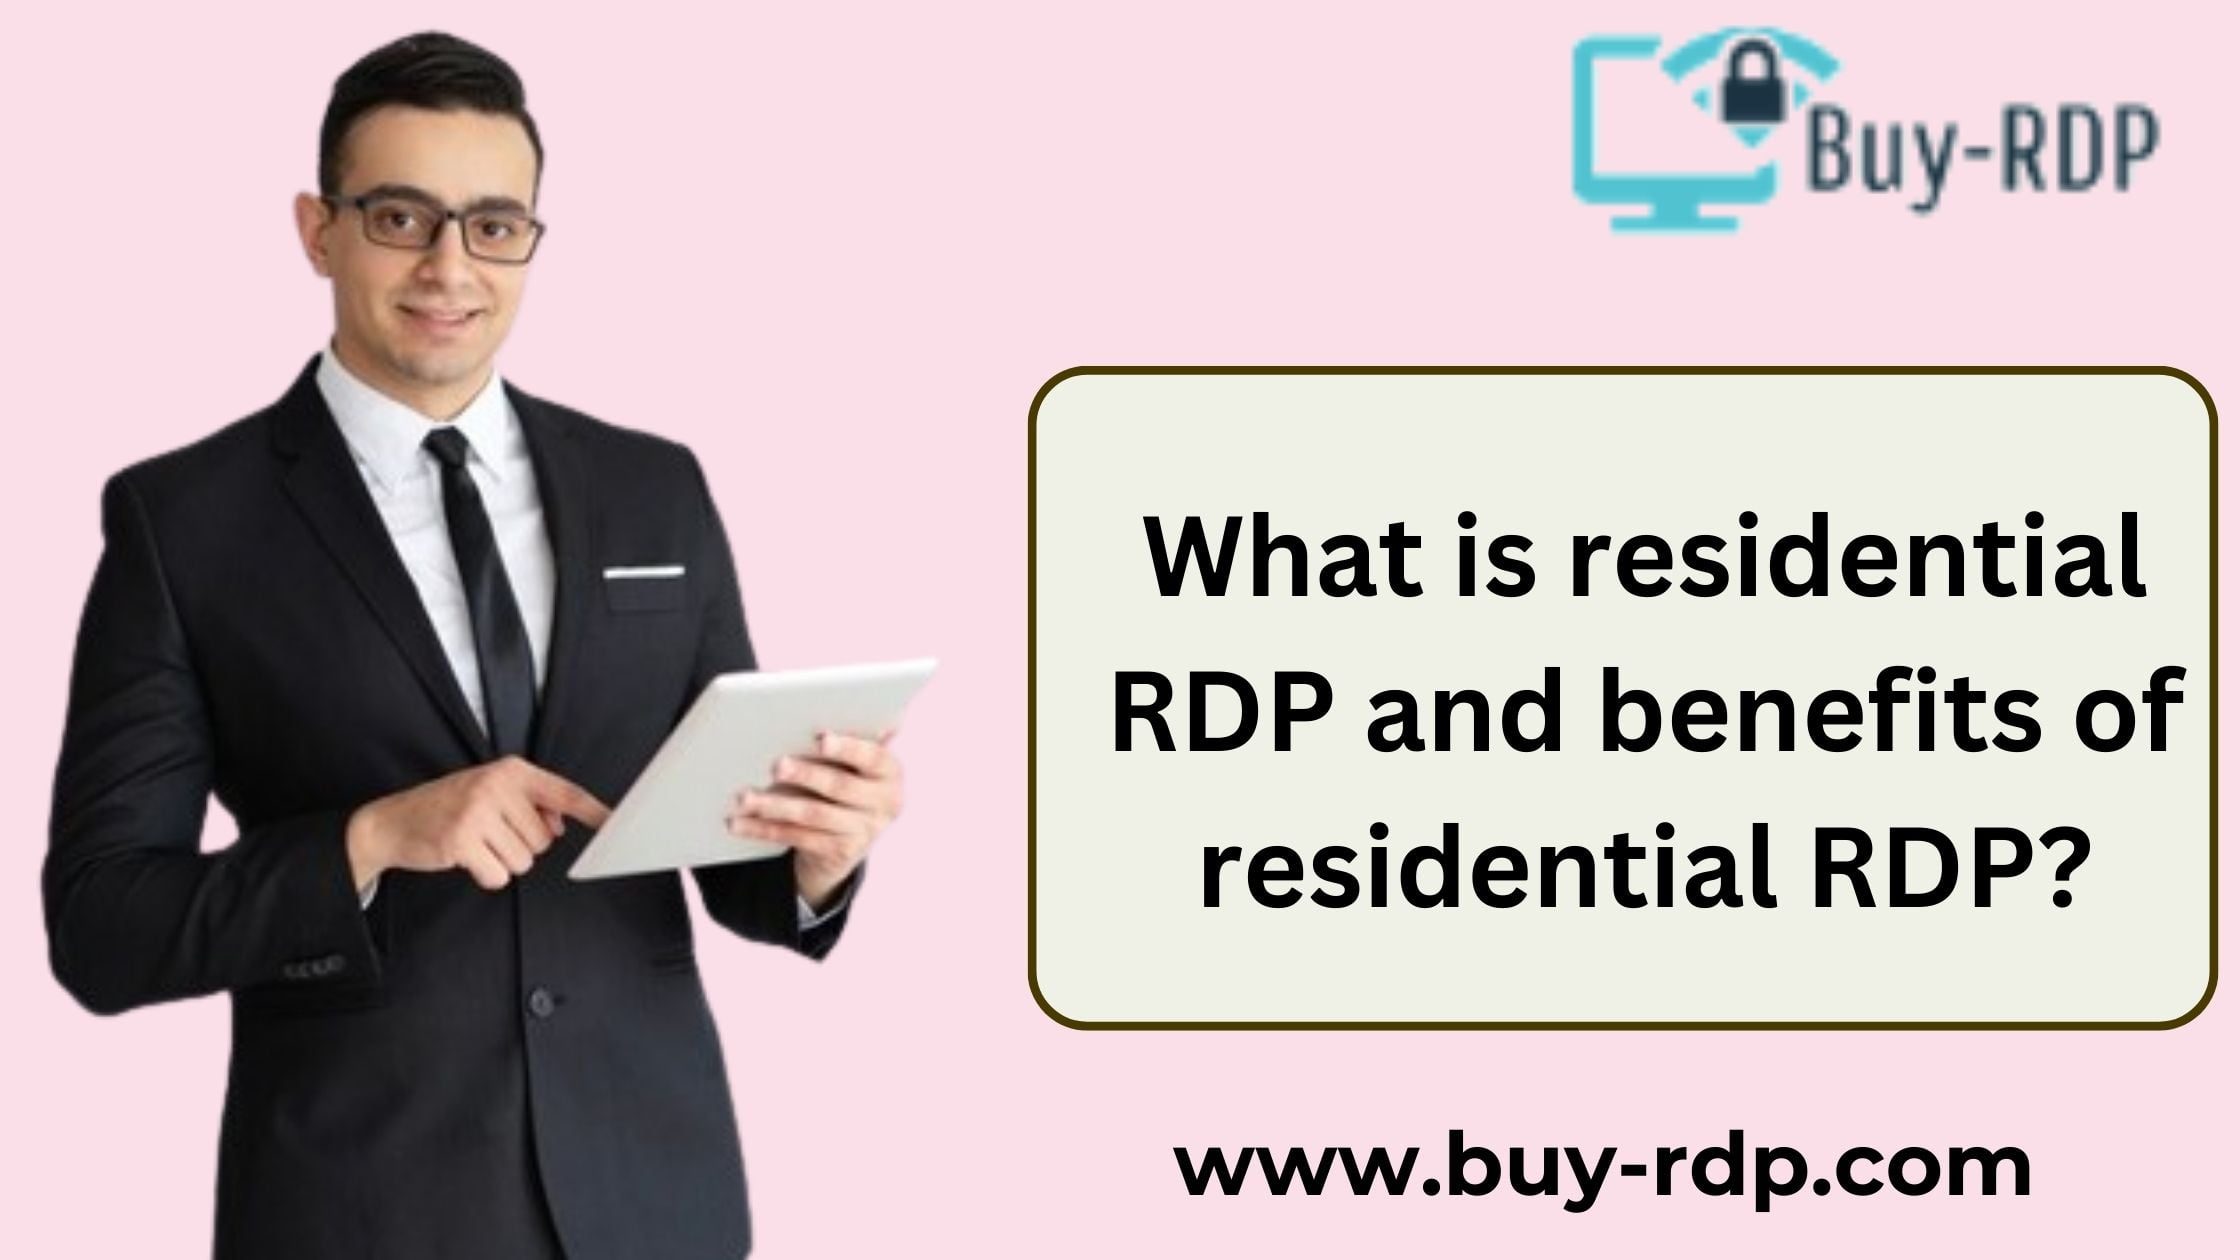 What is residential RDP and benefits of residential RDP